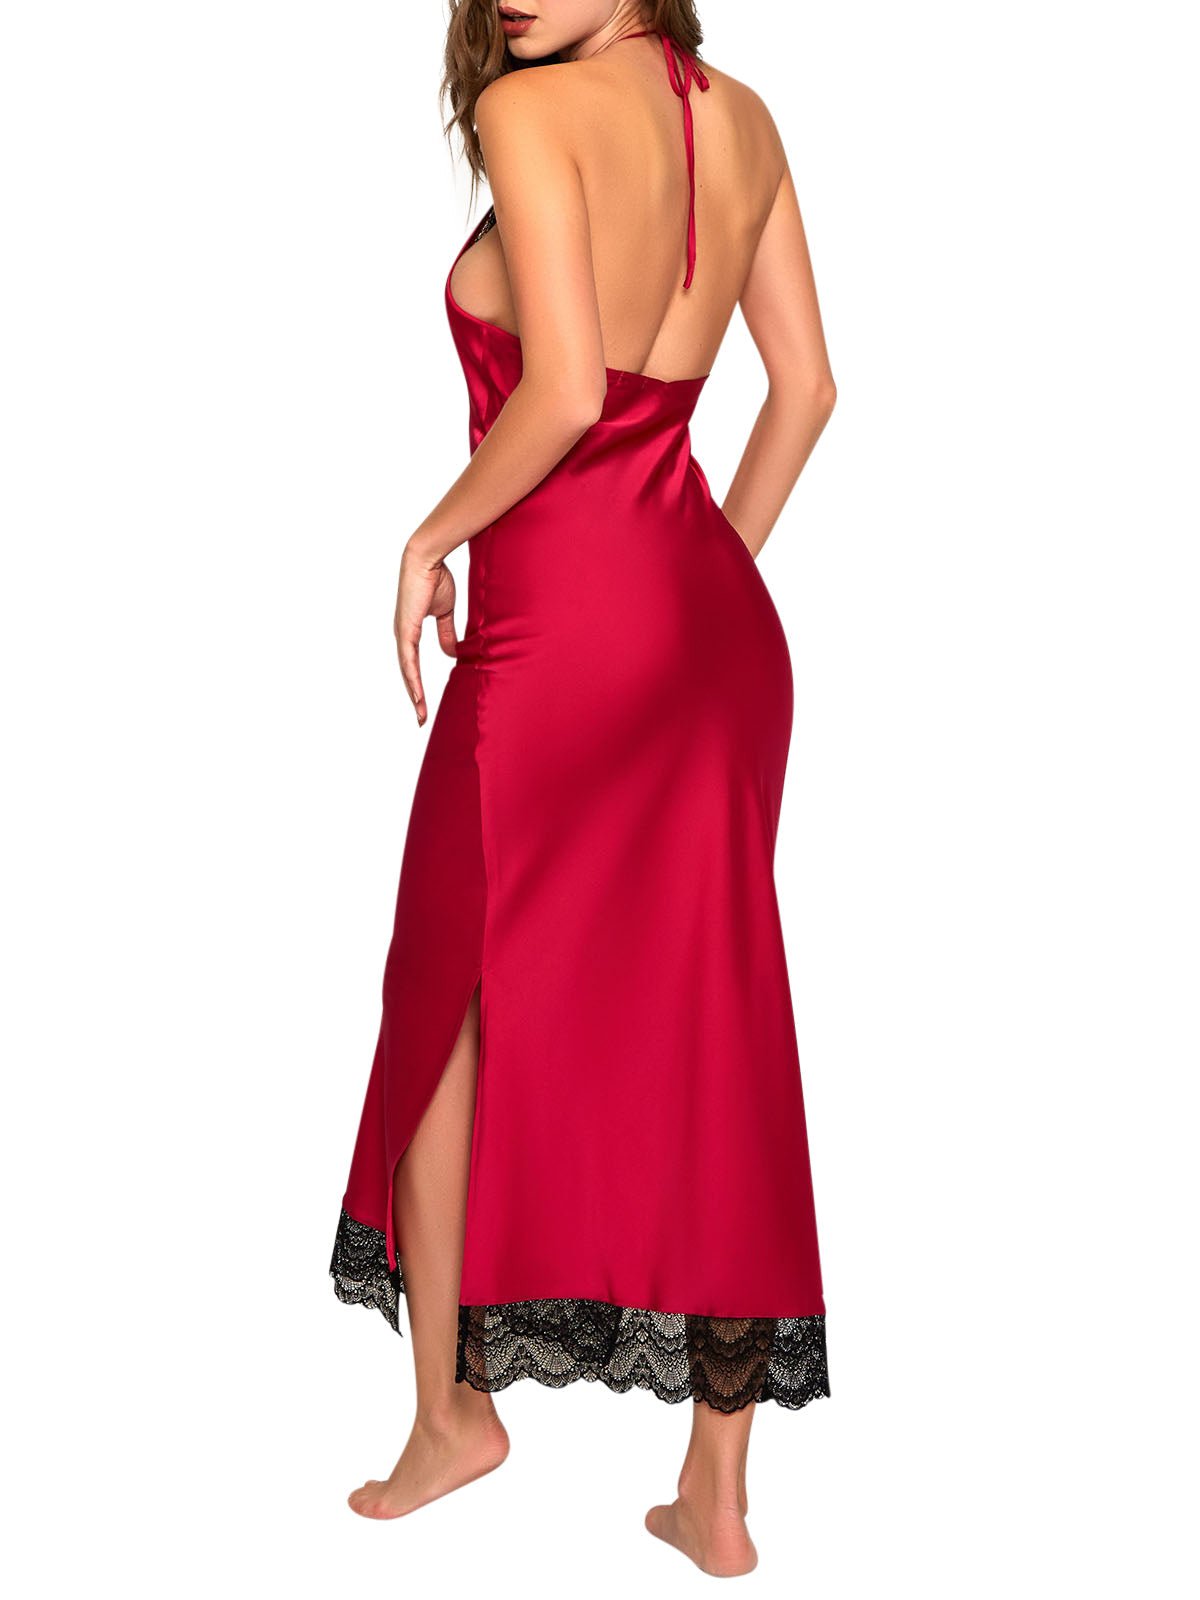 iCollection Chemise Tess Gown